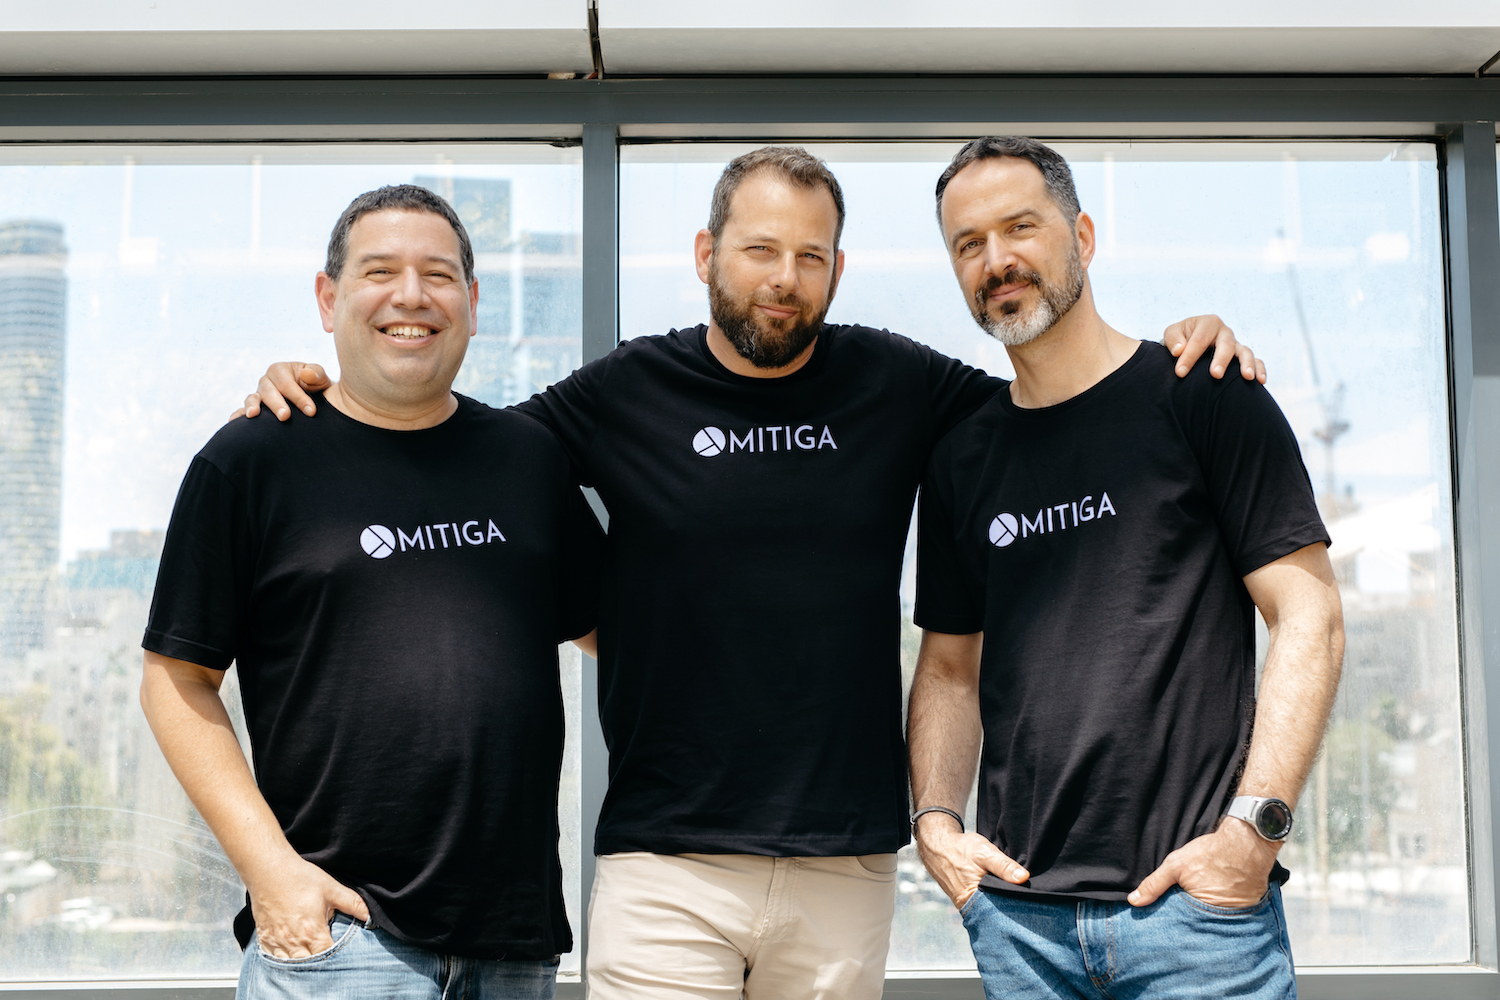 Mitiga was co-founded by CTO Ofer Maor, CEO Tal Mozes and COO Ariel Parnes. They are pictured side-by-side in front of a window.